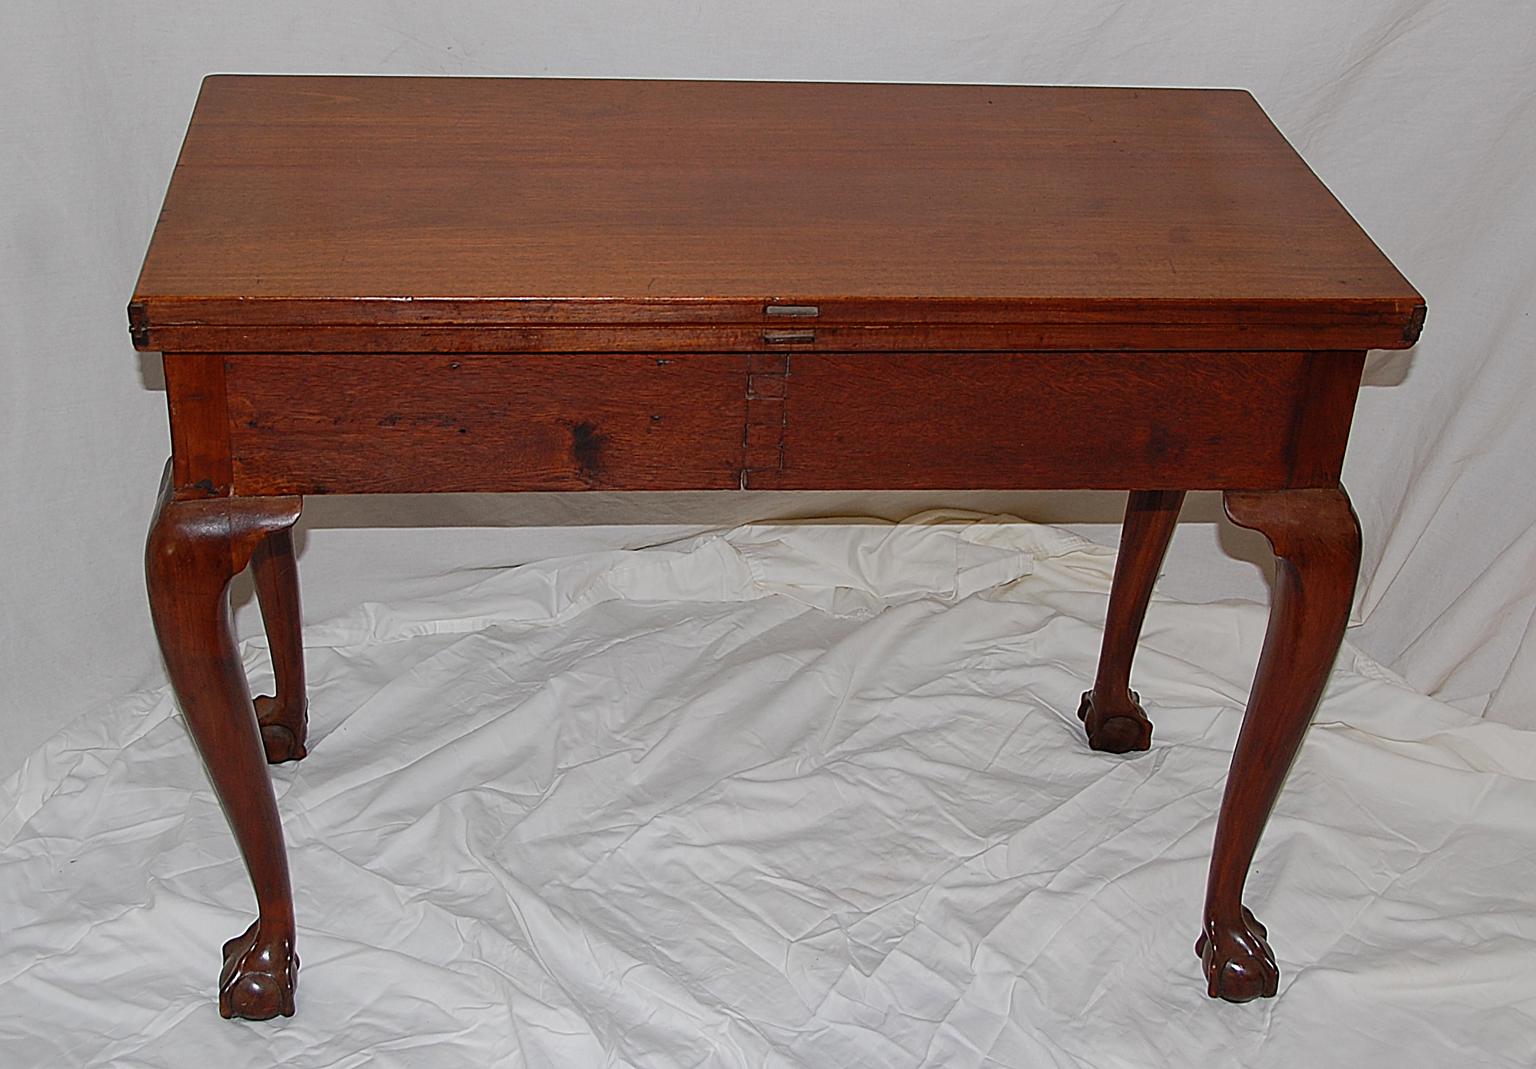 Irish George II Period Chippendale Mahogany Teatable Carved Cabriole Legs For Sale 3